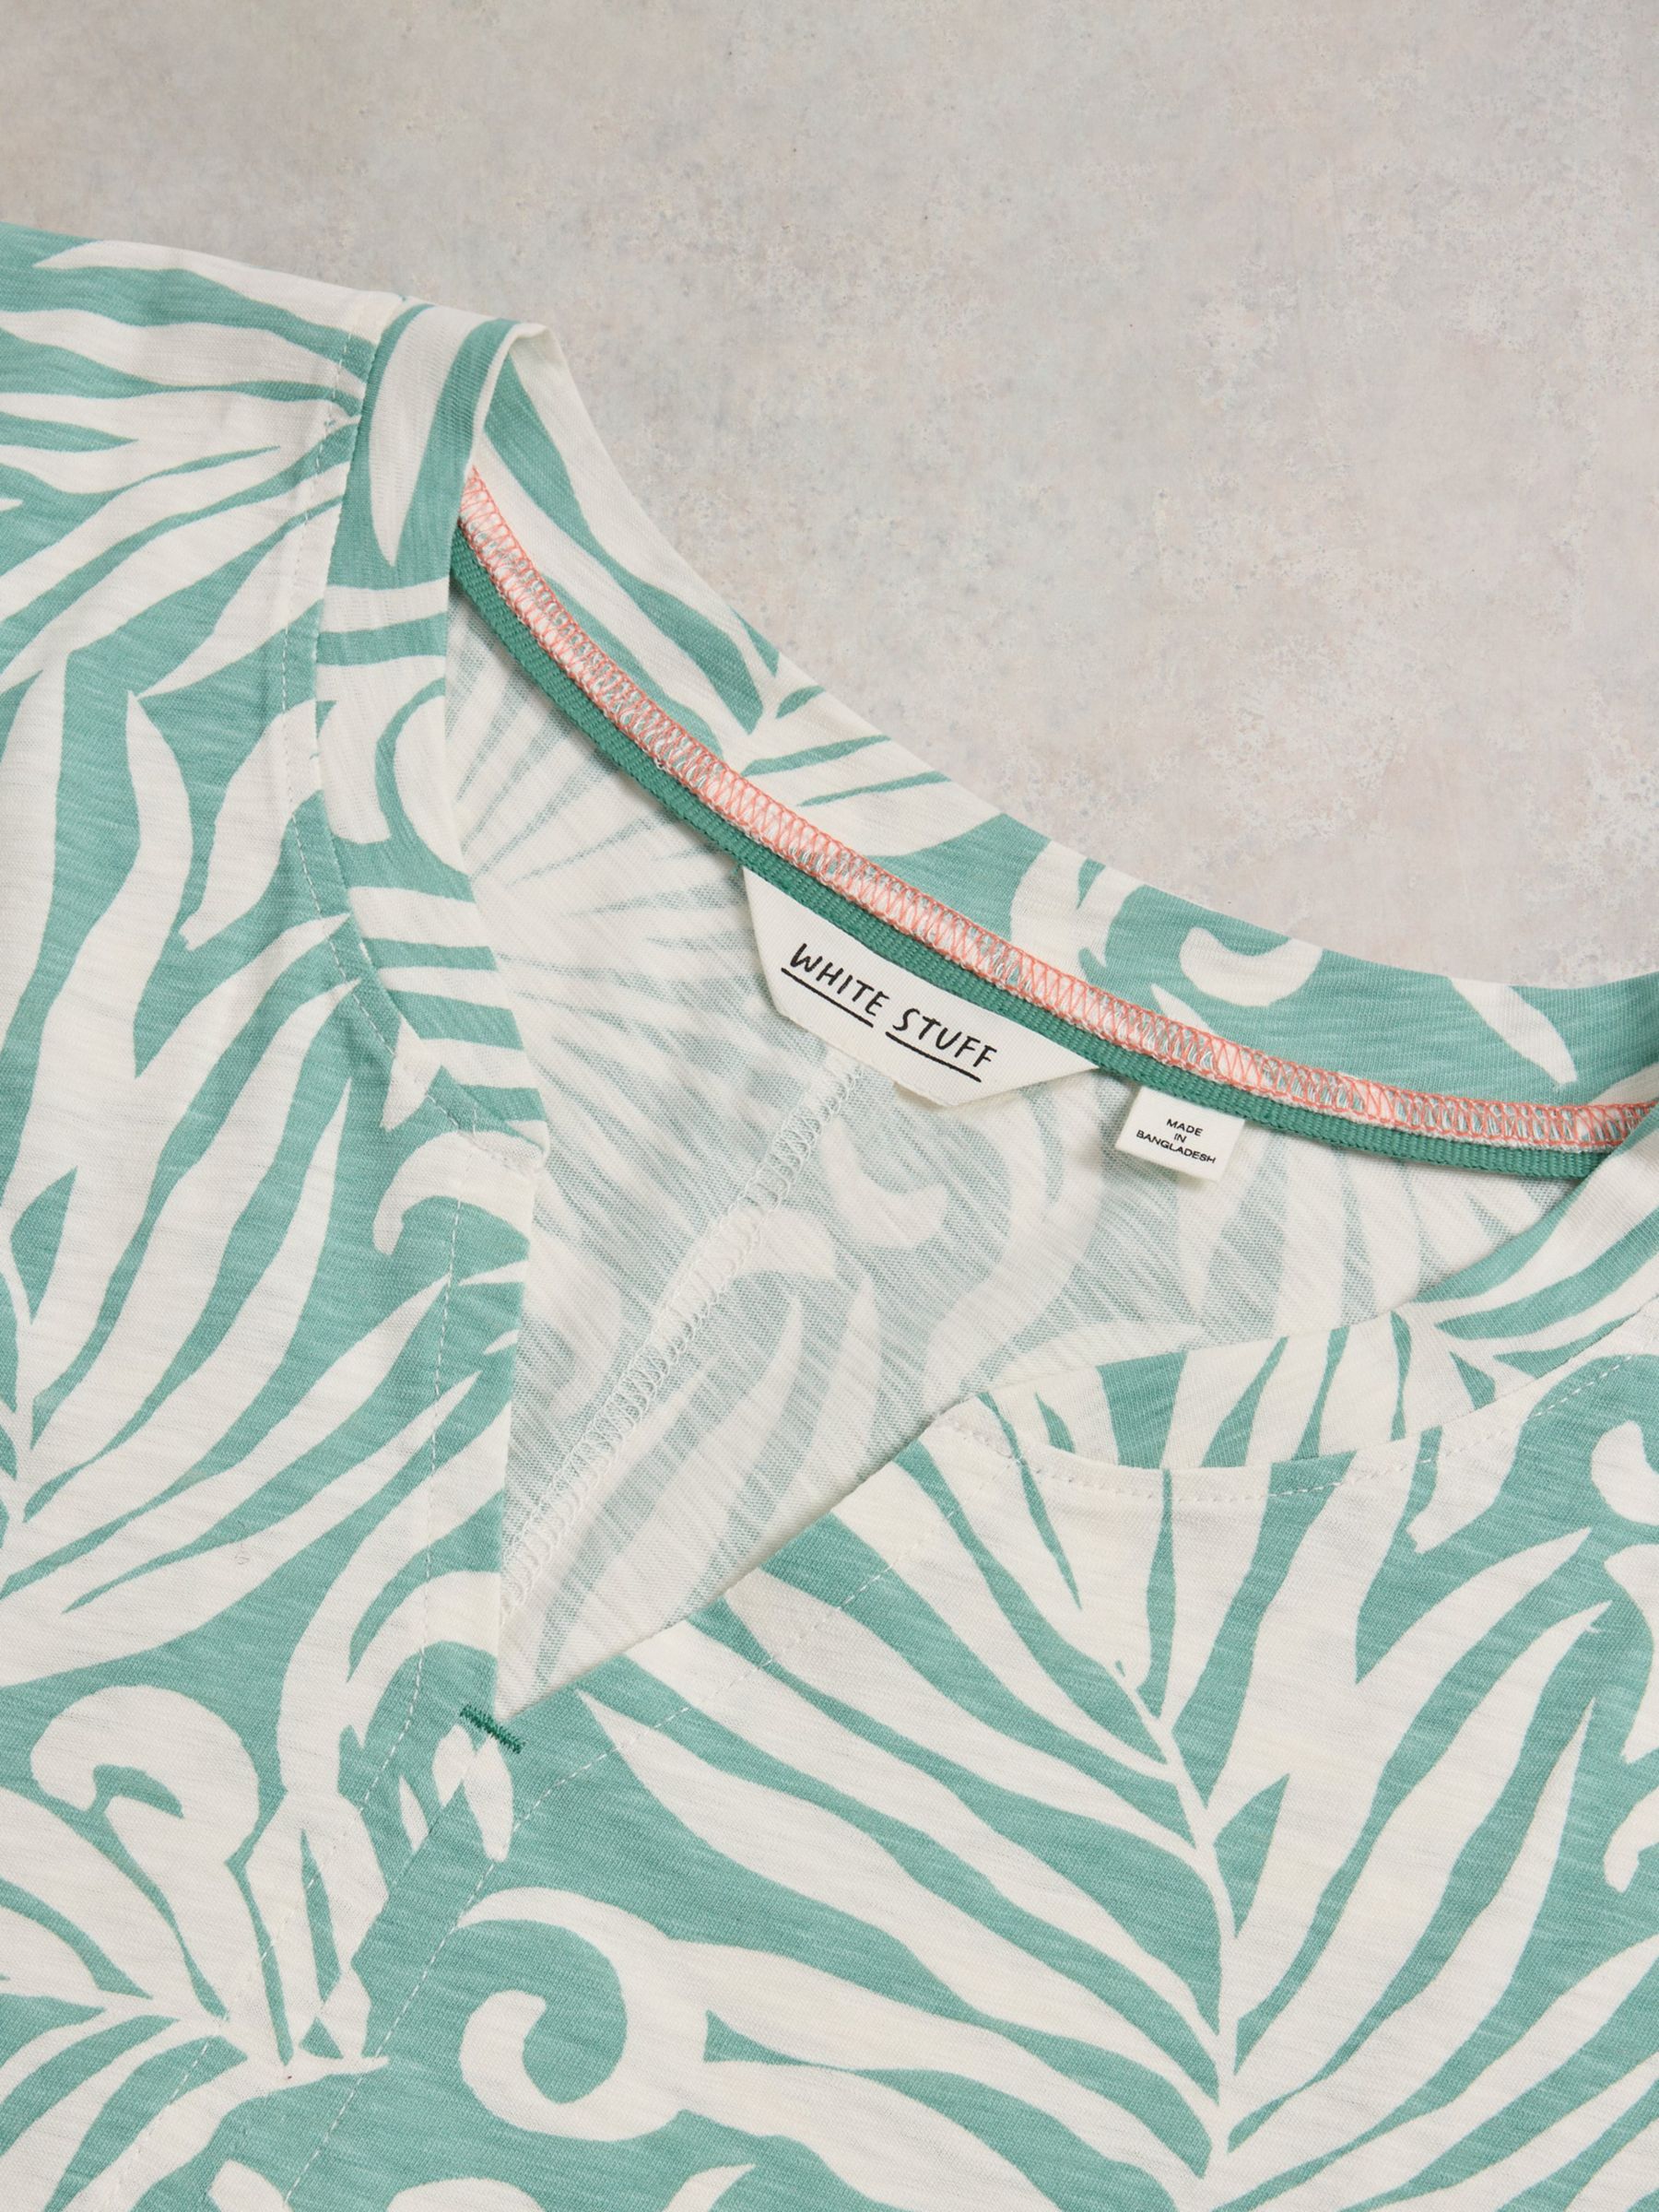 Buy White Stuff Nelly Notch Neck T-Shirt, Teal Online at johnlewis.com